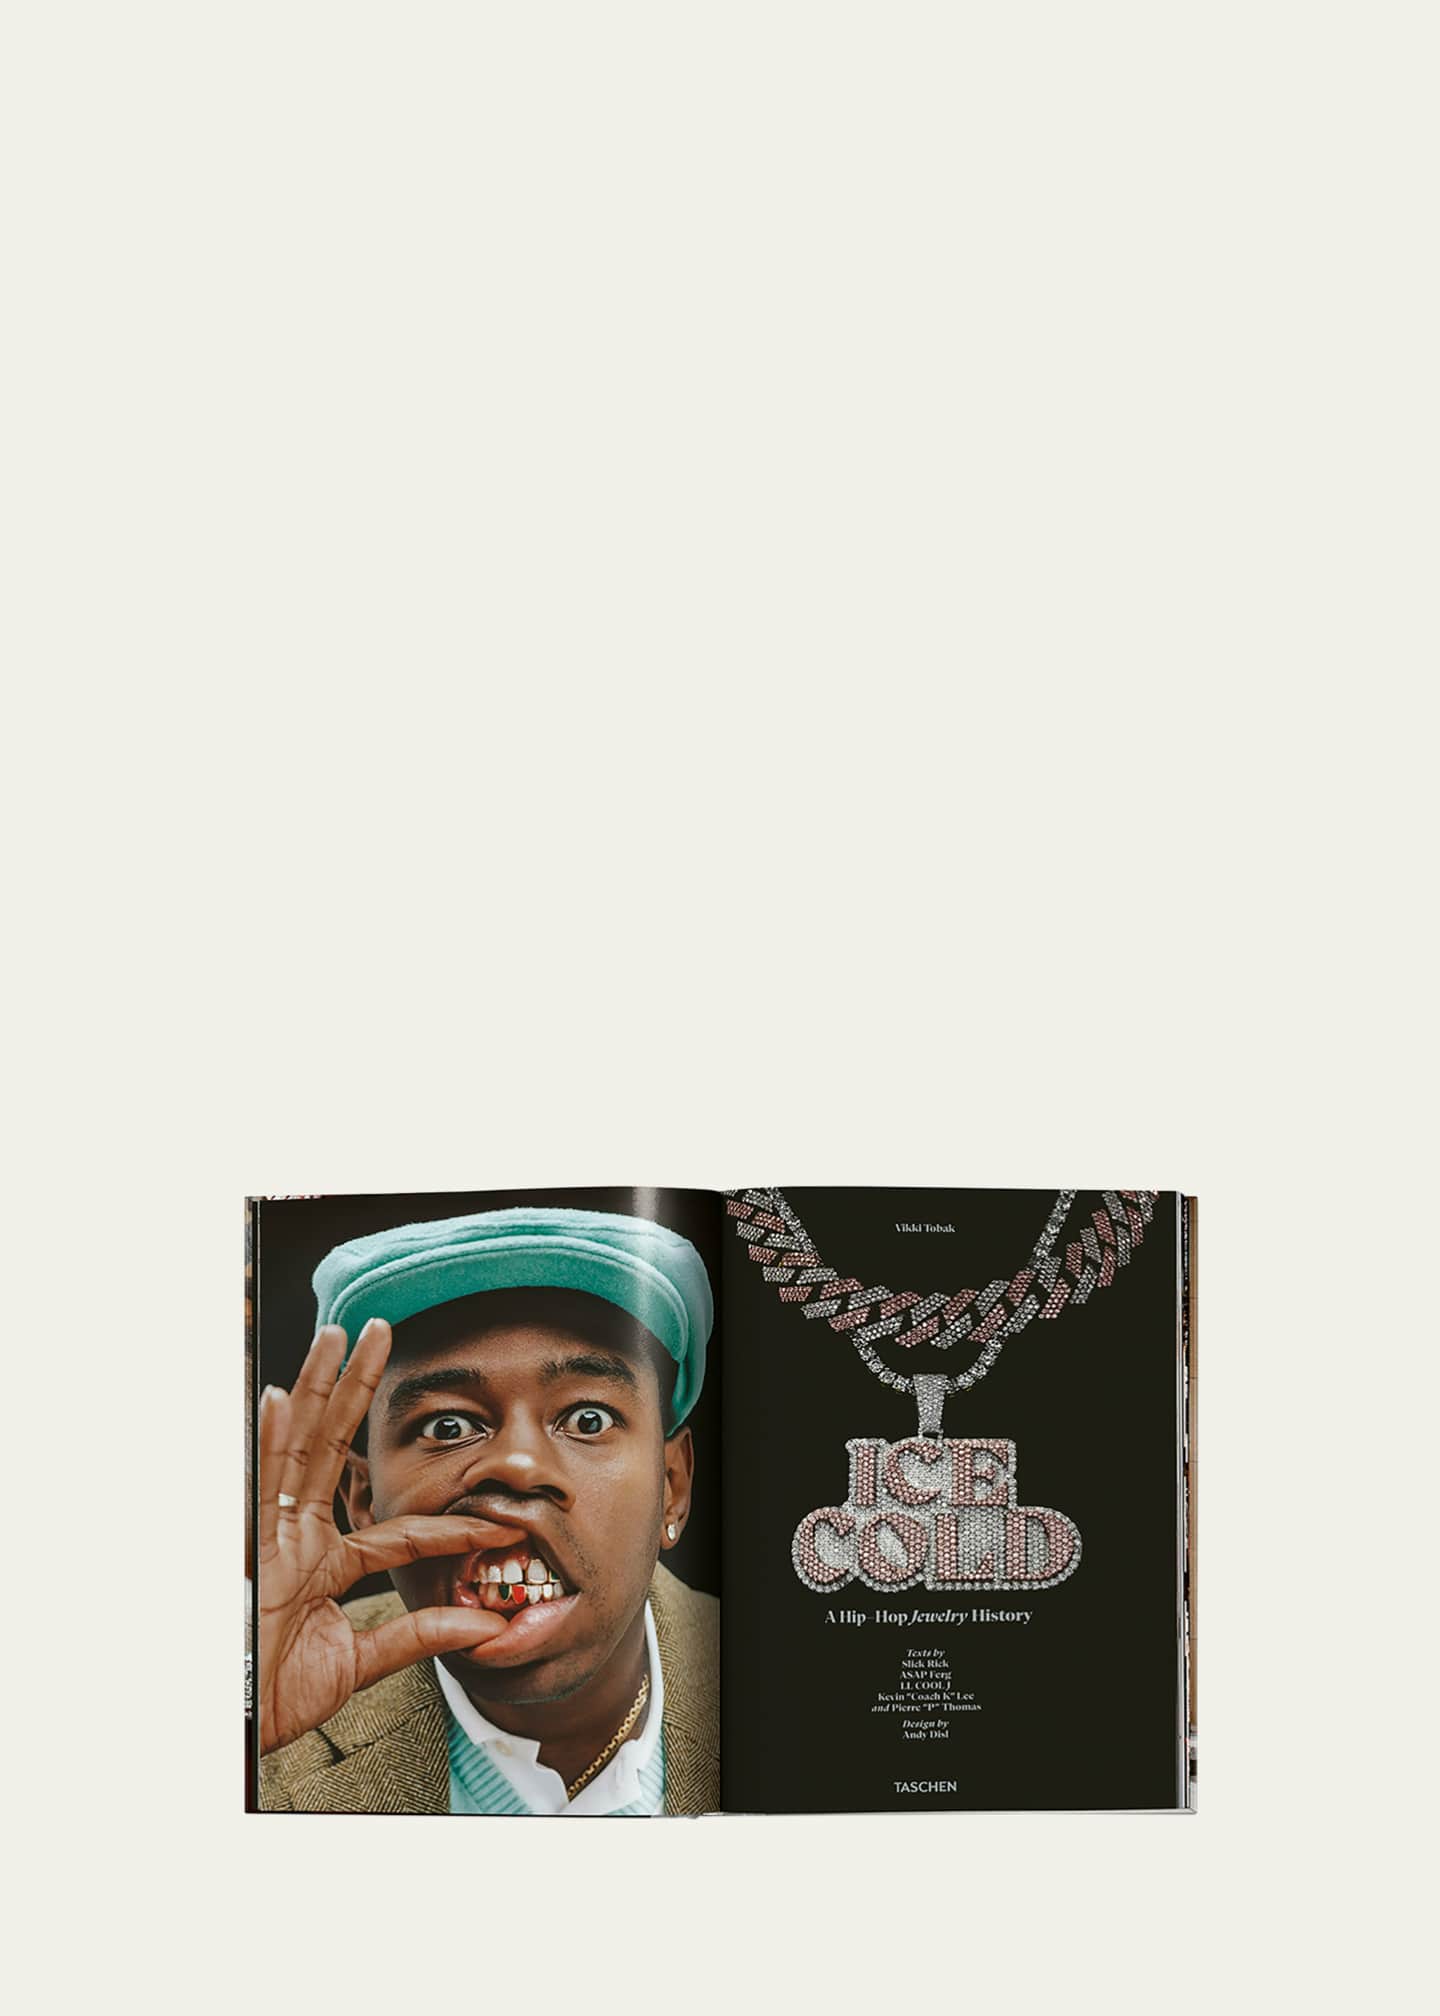 TASCHEN Ice Cold. A Hip-Hop Jewelry History Book